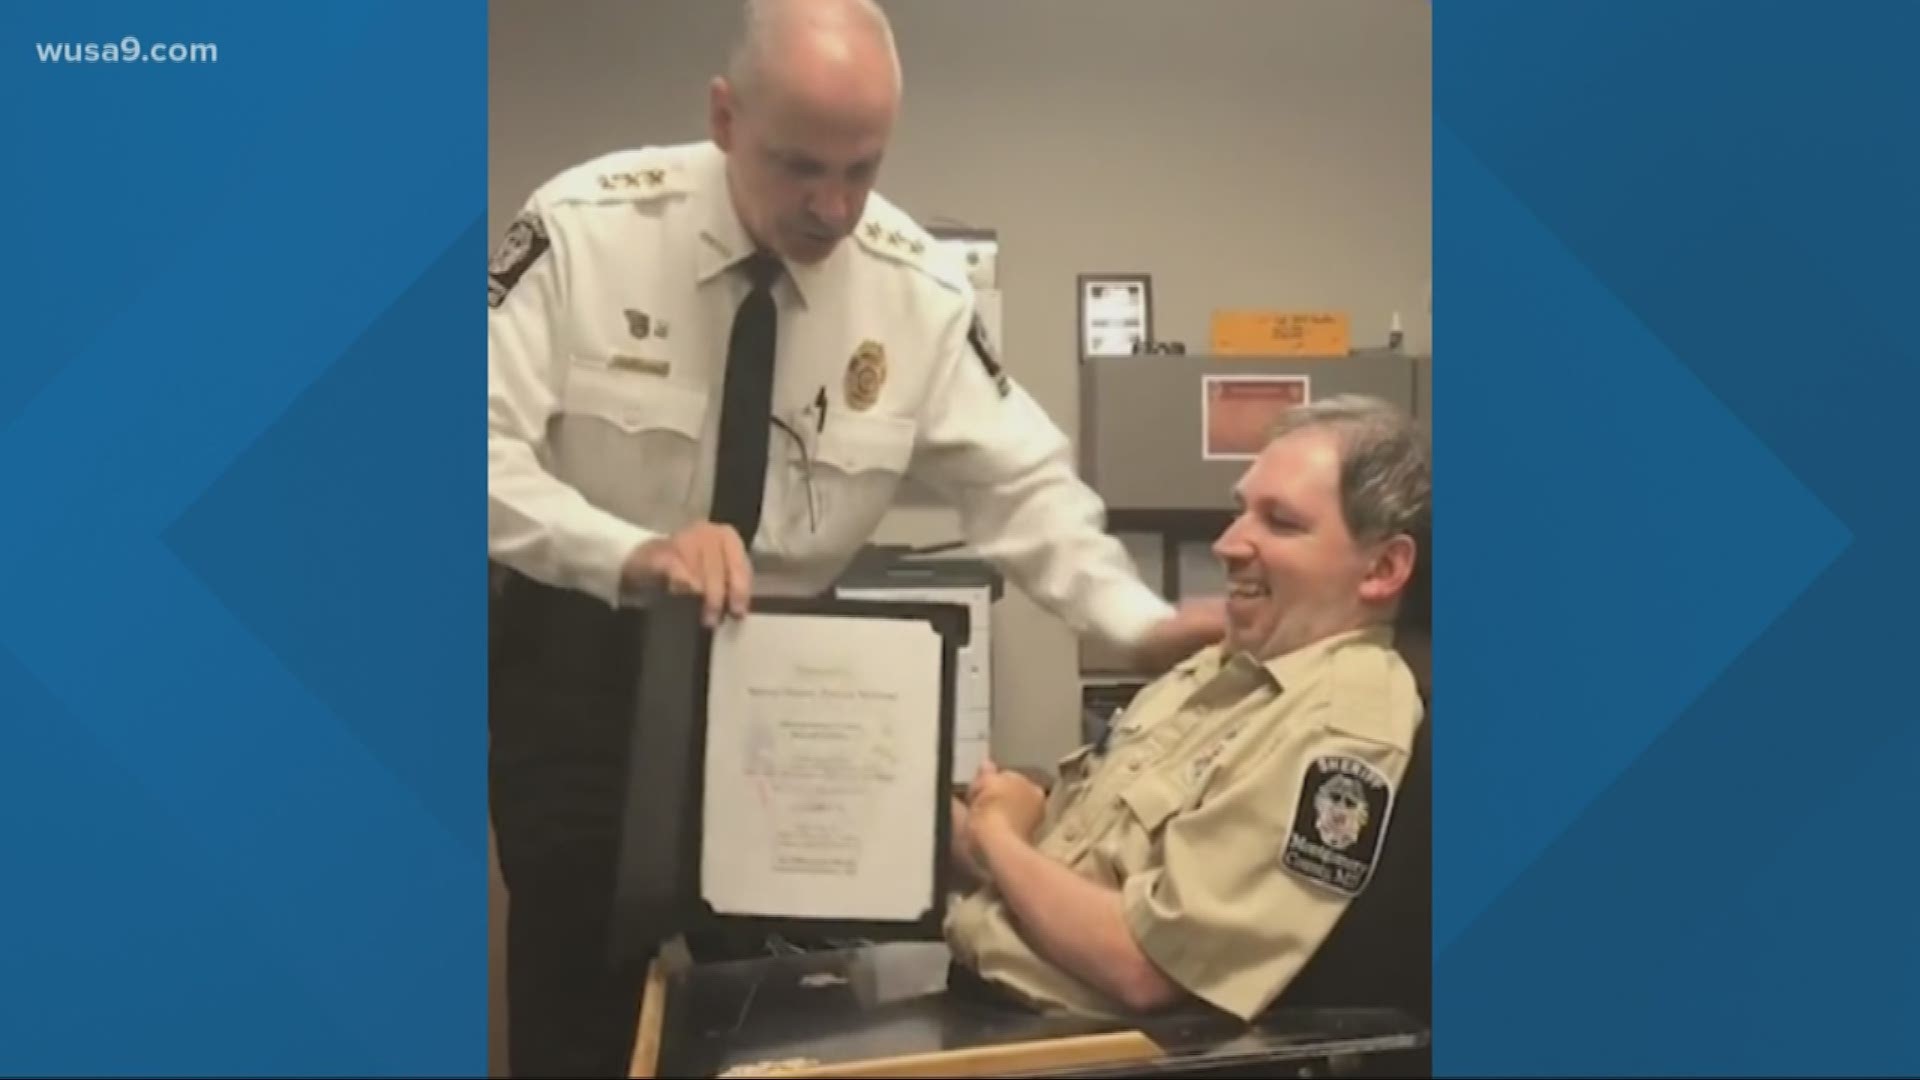 The Montgomery County sheriff's office today honored Special Deputy Patrick McGann.
After 17 years of service, McGann is retiring. The Deputy became paralyzed at an early age -- but still achieved his dream of working in law enforcement. He's been a trusted presence at the Montgomery County courthouse.